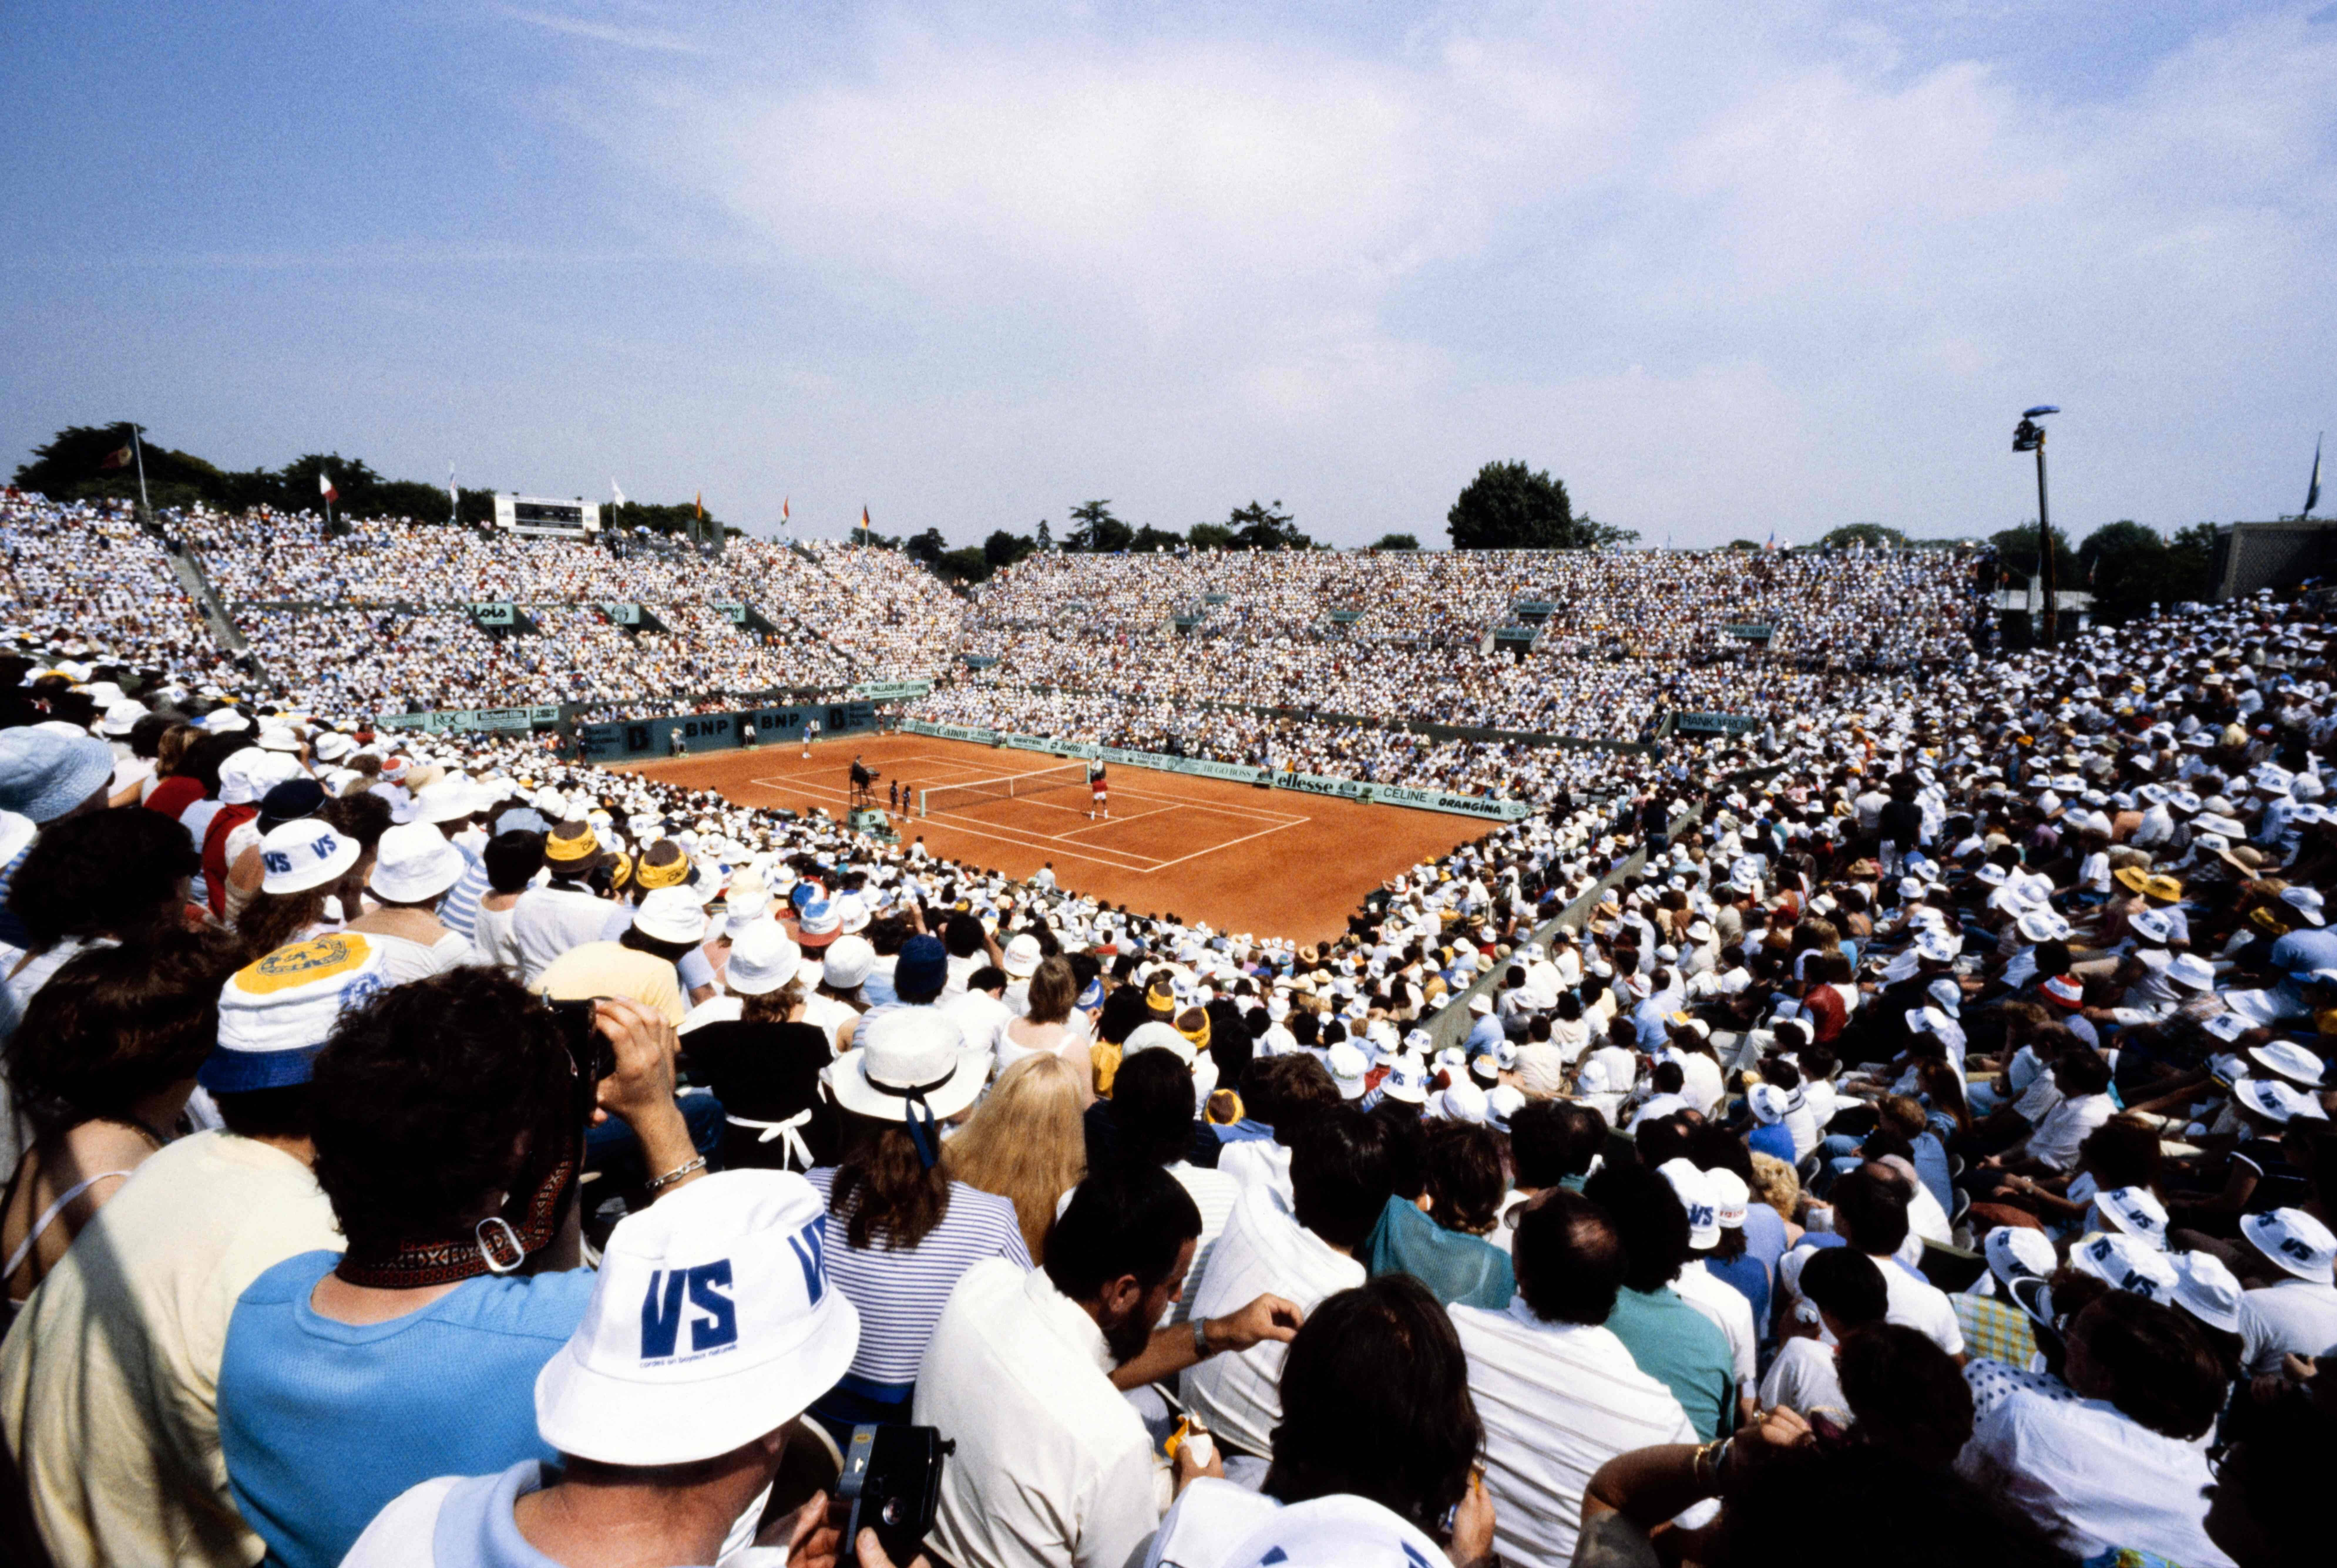 (FILES)This general view shows spectators as they watch play in the men's singles final match between France's Yannick Noah and Sweden's Mats Wilander of The Roland Garros 1983 French Open tennis tournament in Paris on June 5, 1983. It's been 40 years since a French player last won the men's singles title at Roland Garros and Yannick Noah's 1983 achievement is unlikely to be matched this year when the second major of the season starts on May 28, 2023. (Photo by AFP)